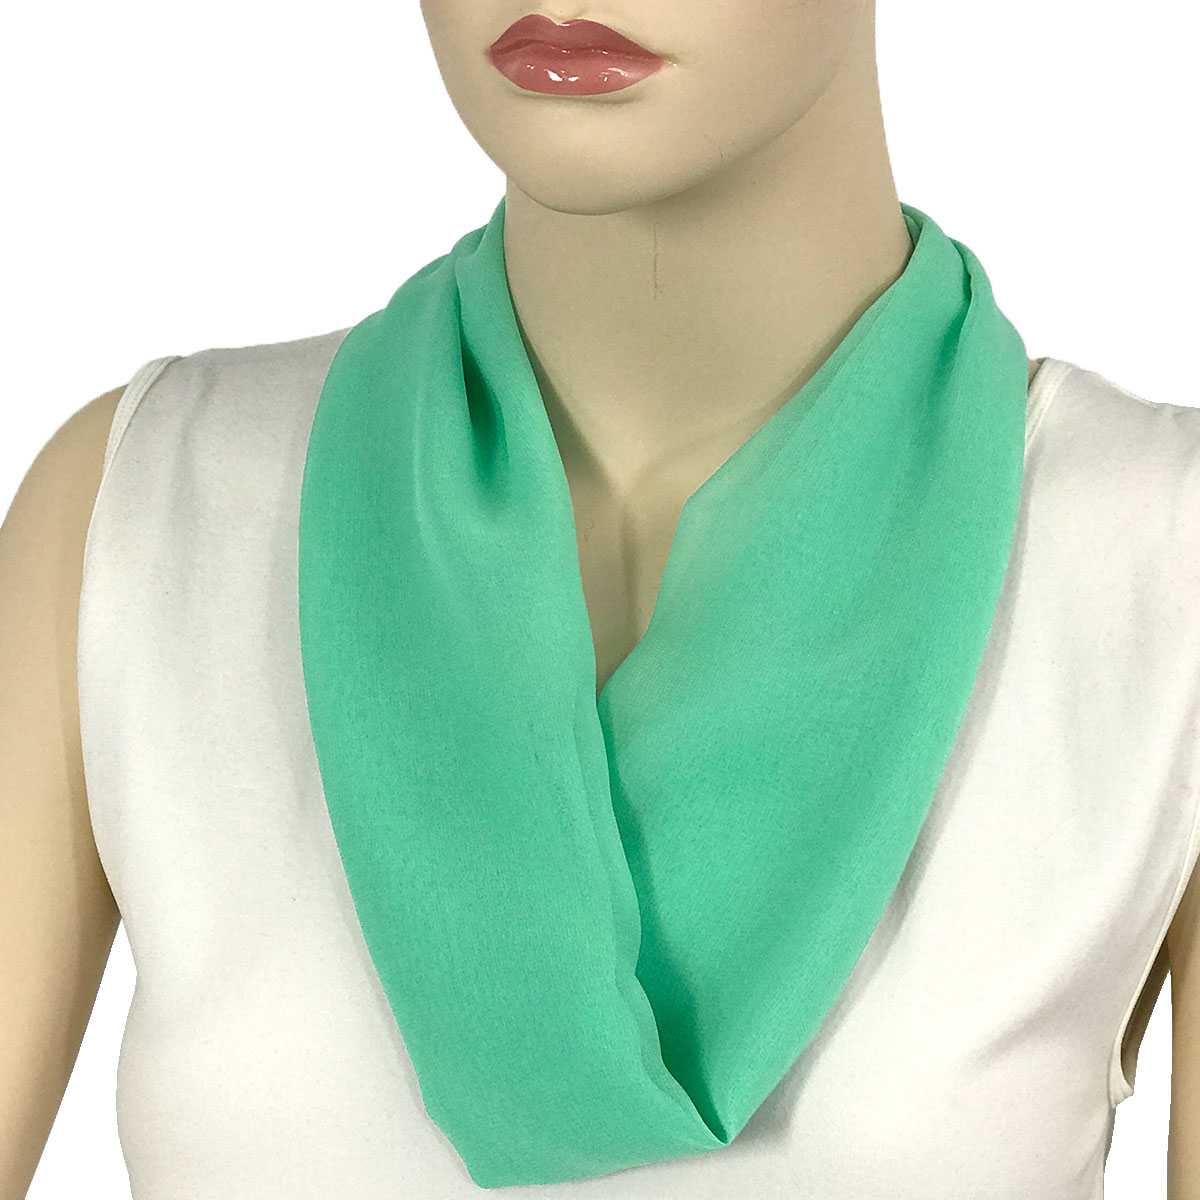 SMI - Solid Mint<br>
Magnetic Clasp Silky Dress Scarf